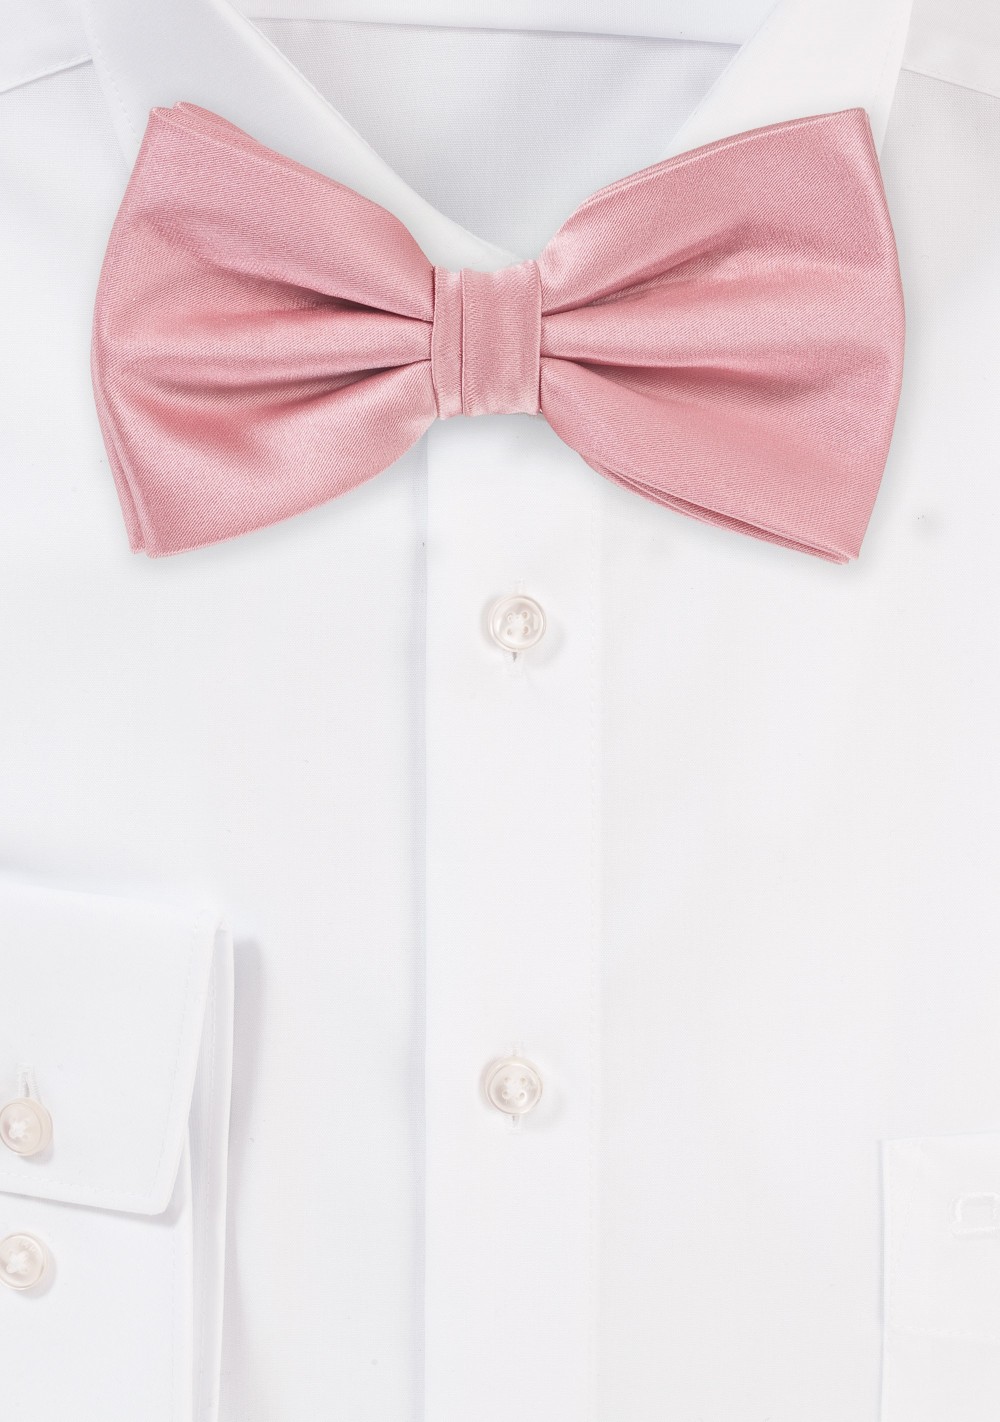 Pre-Tied Bow Tie in Soft Pink